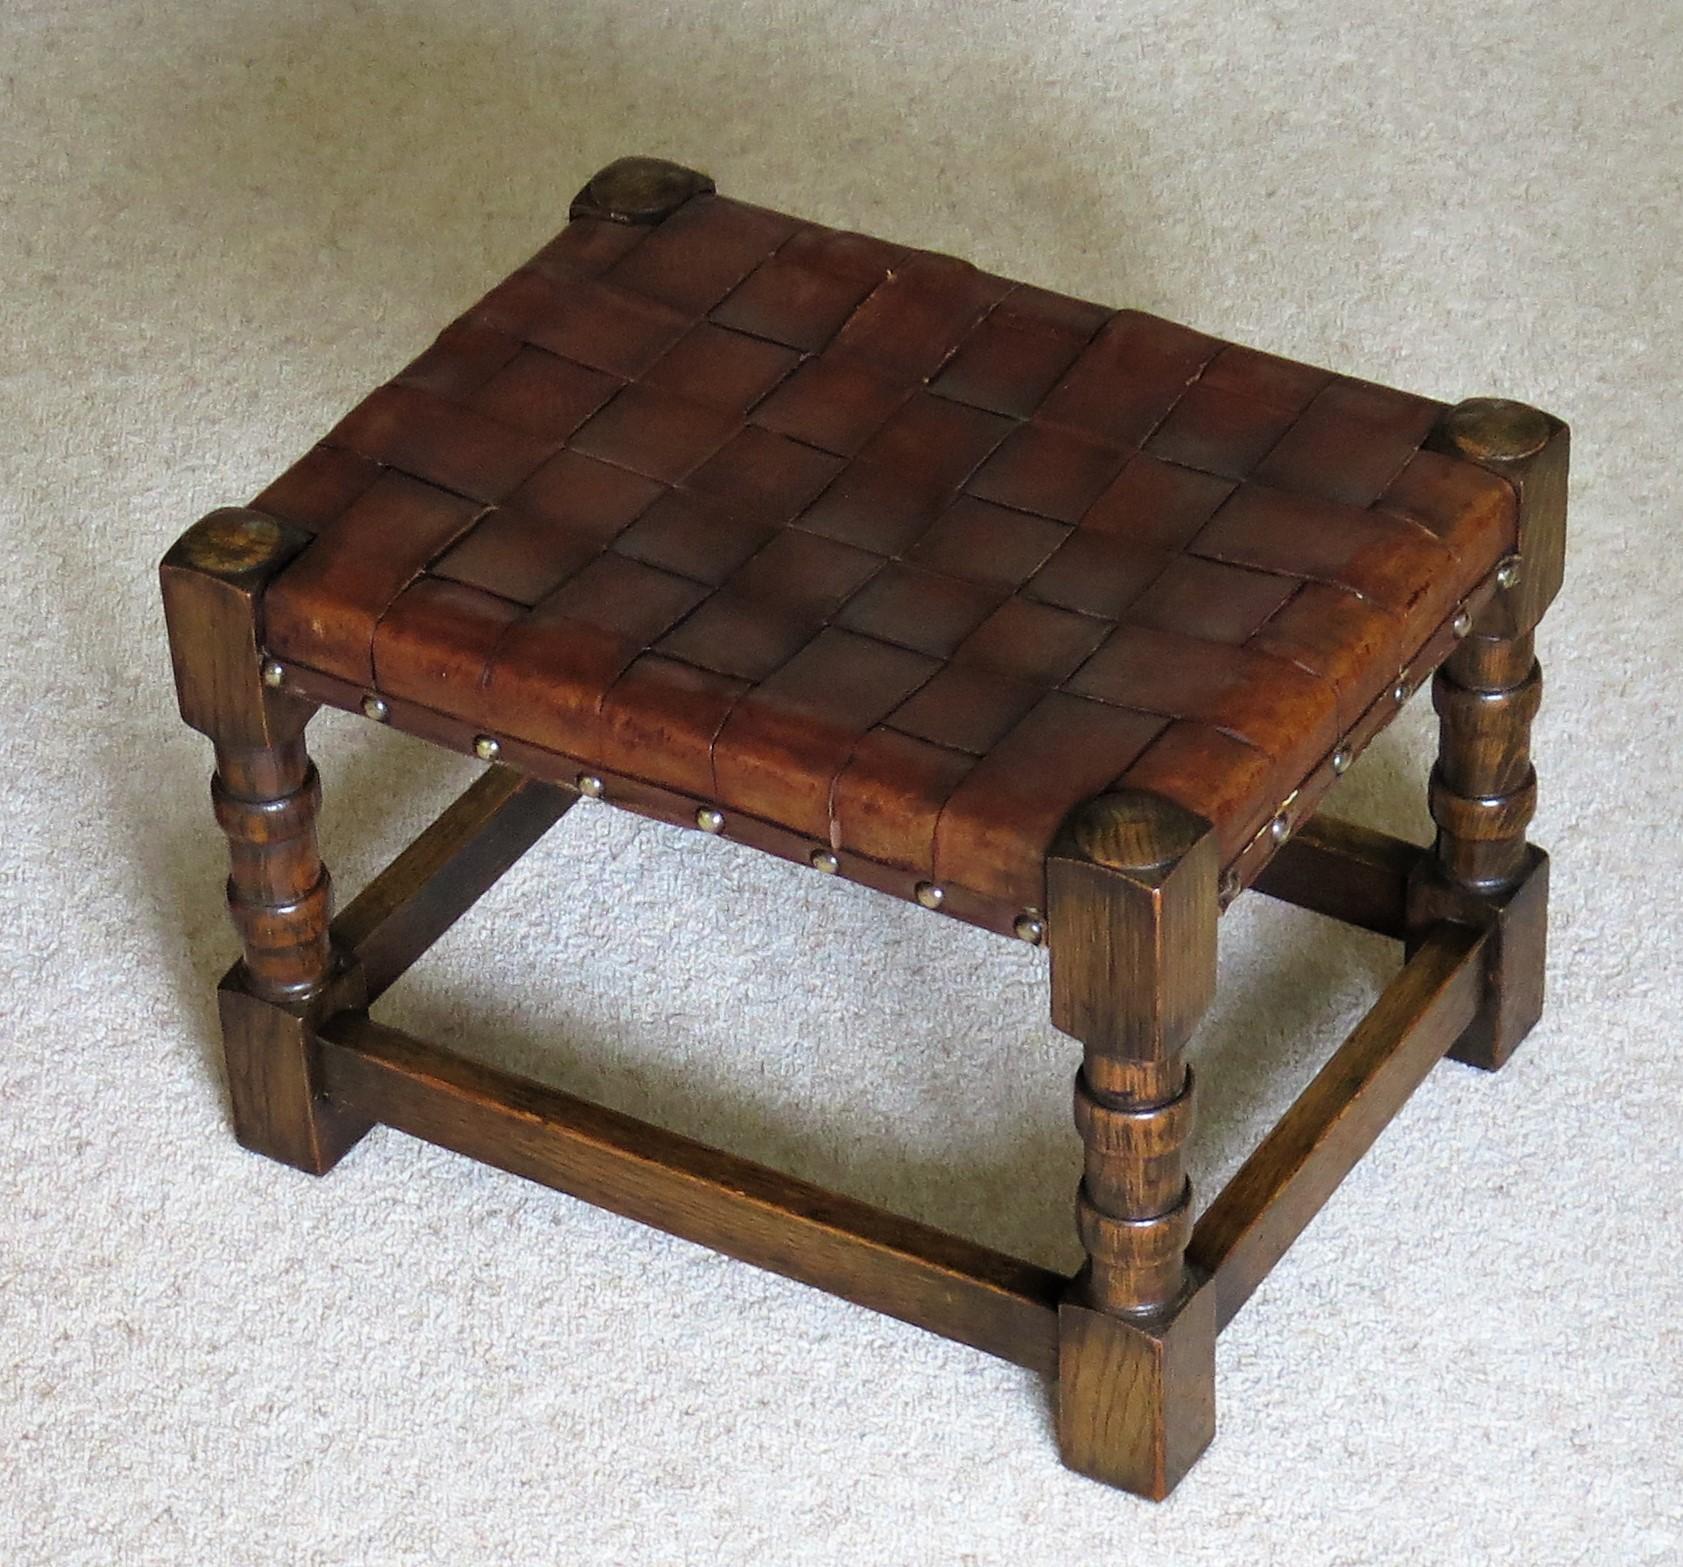 Handmade Oak Stool with Leather Strap Top, Arts & Crafts Late 19th Century In Good Condition For Sale In Lincoln, Lincolnshire